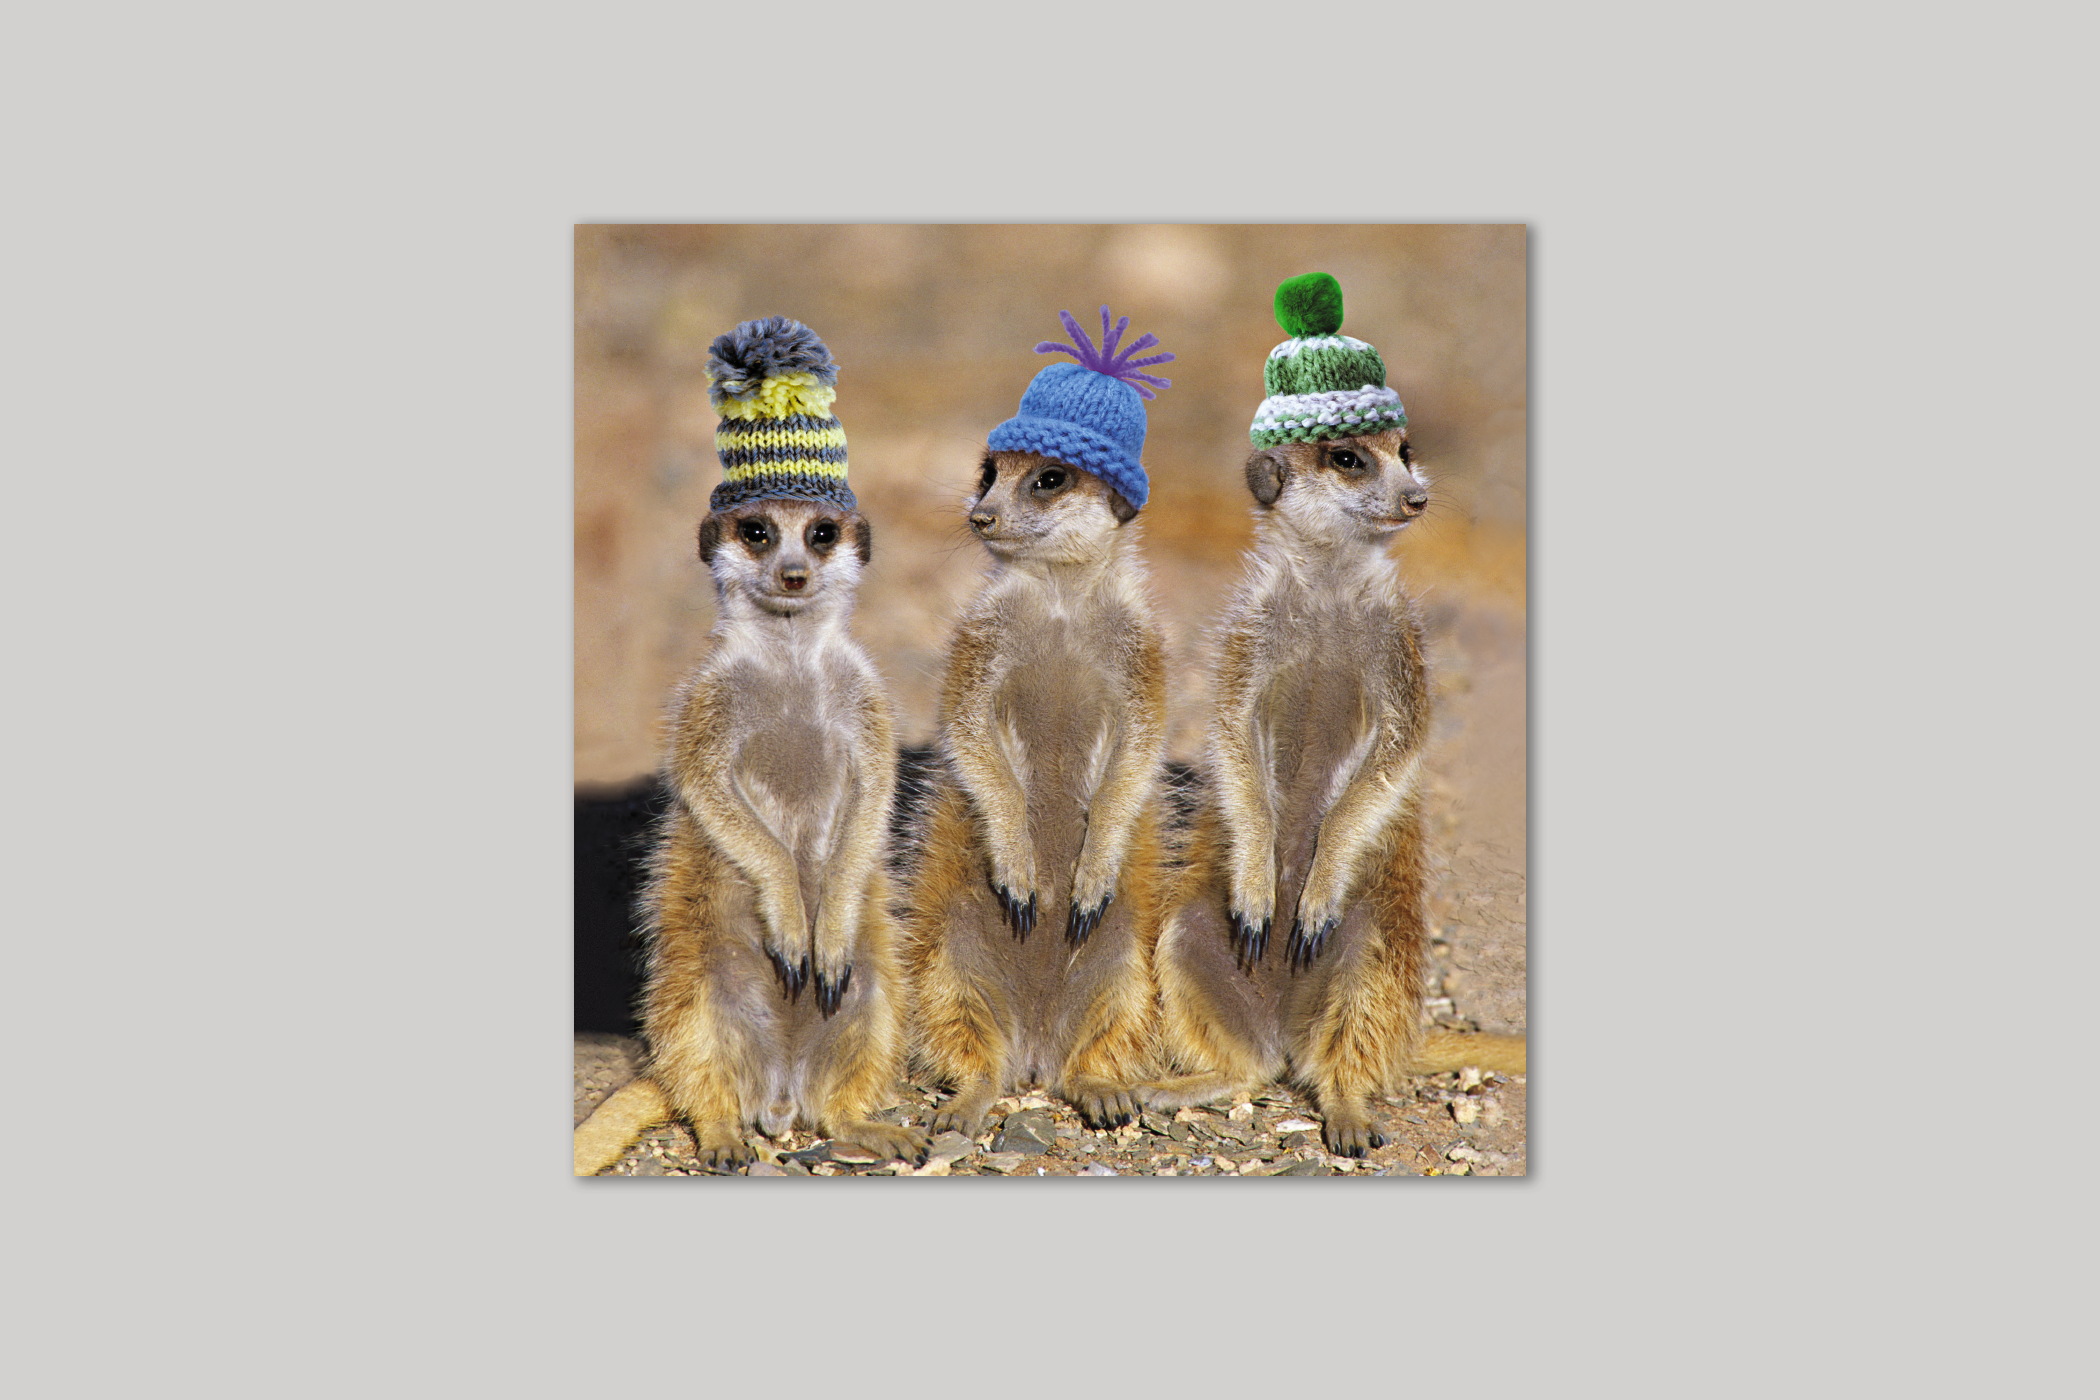 Meerkats in Hats from Exposure range of photographic cards by Icon.